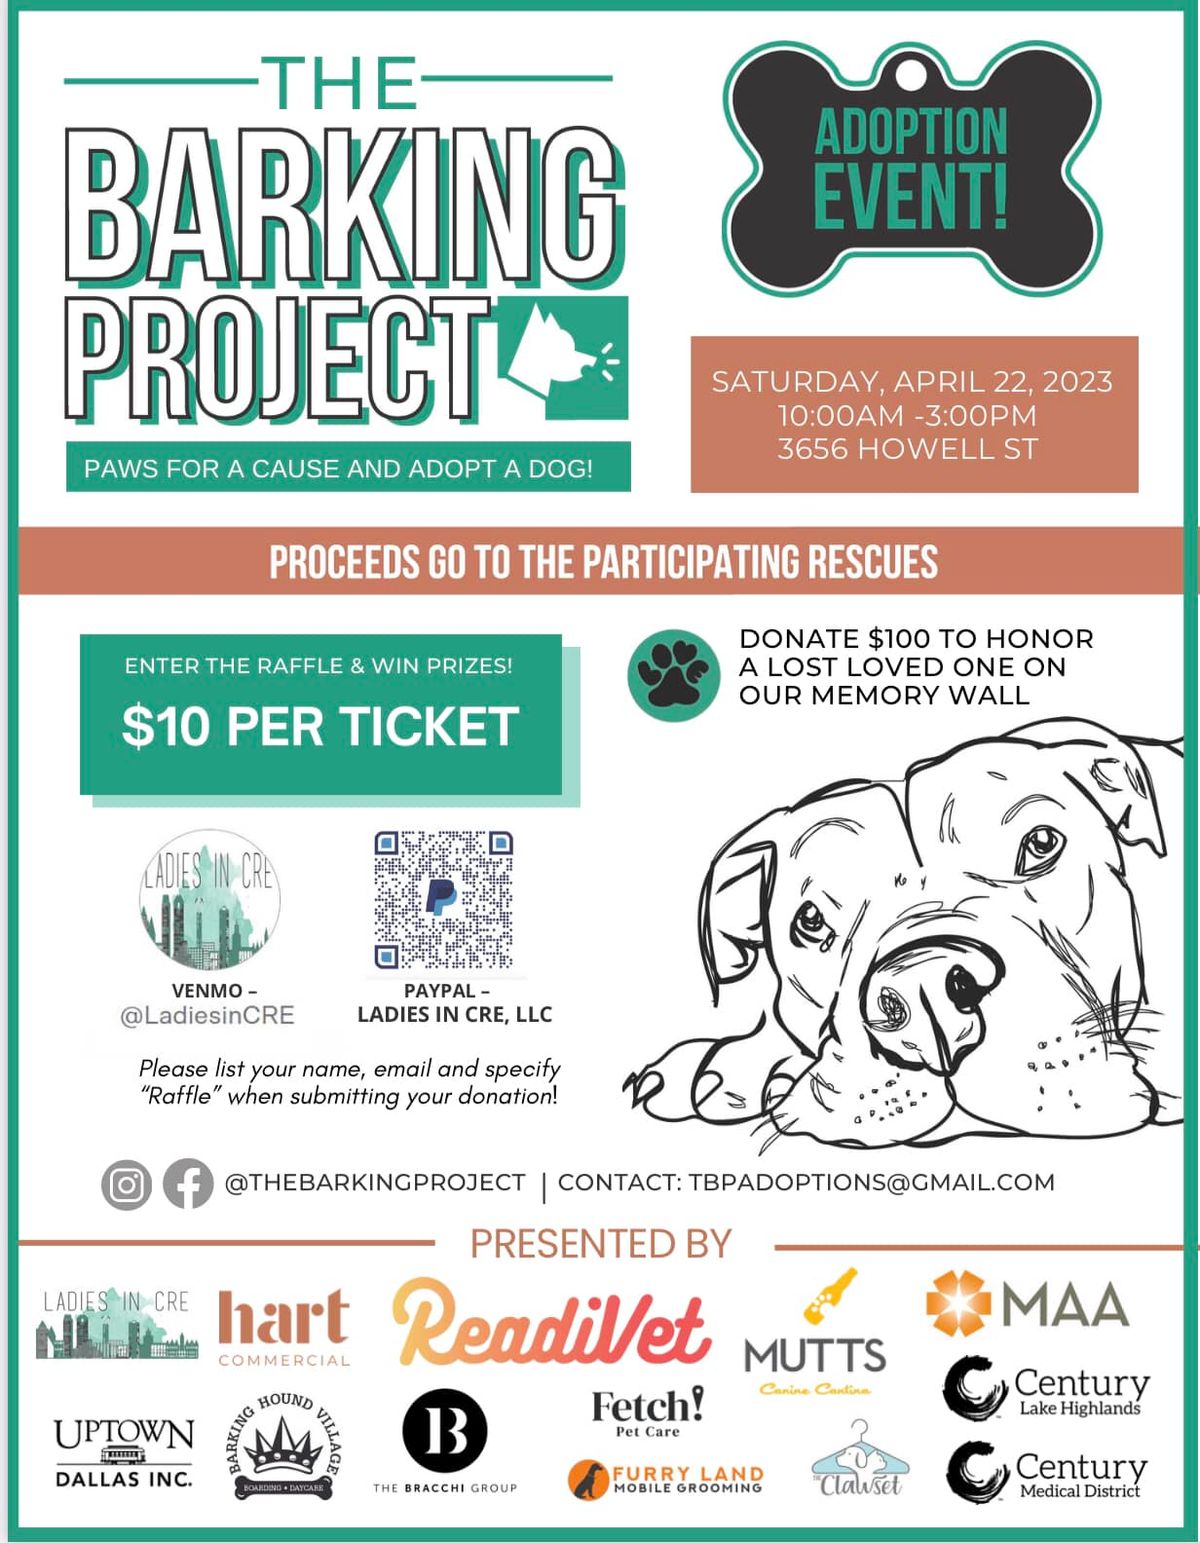 Cody's at the 3rd Annual Barking Project Adoption Event